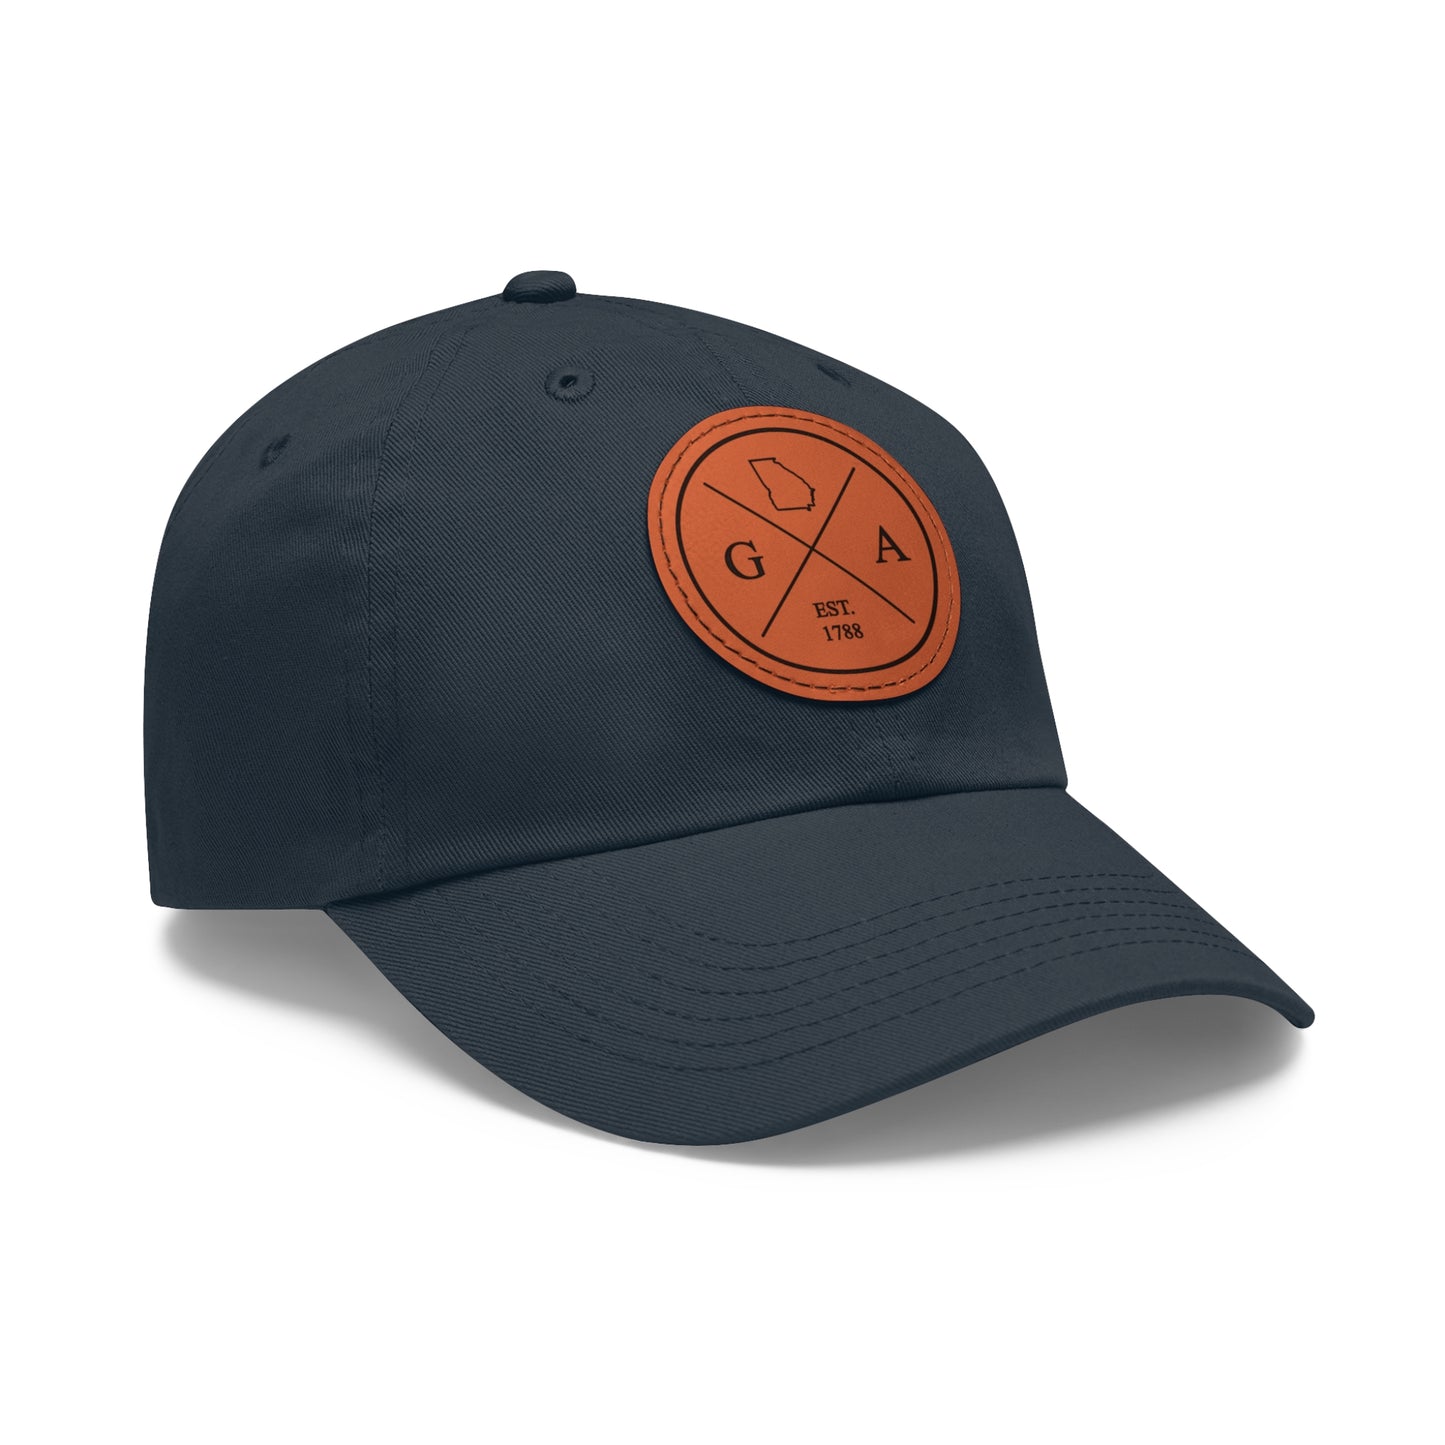 Georgia Dad Hat with Leather Patch